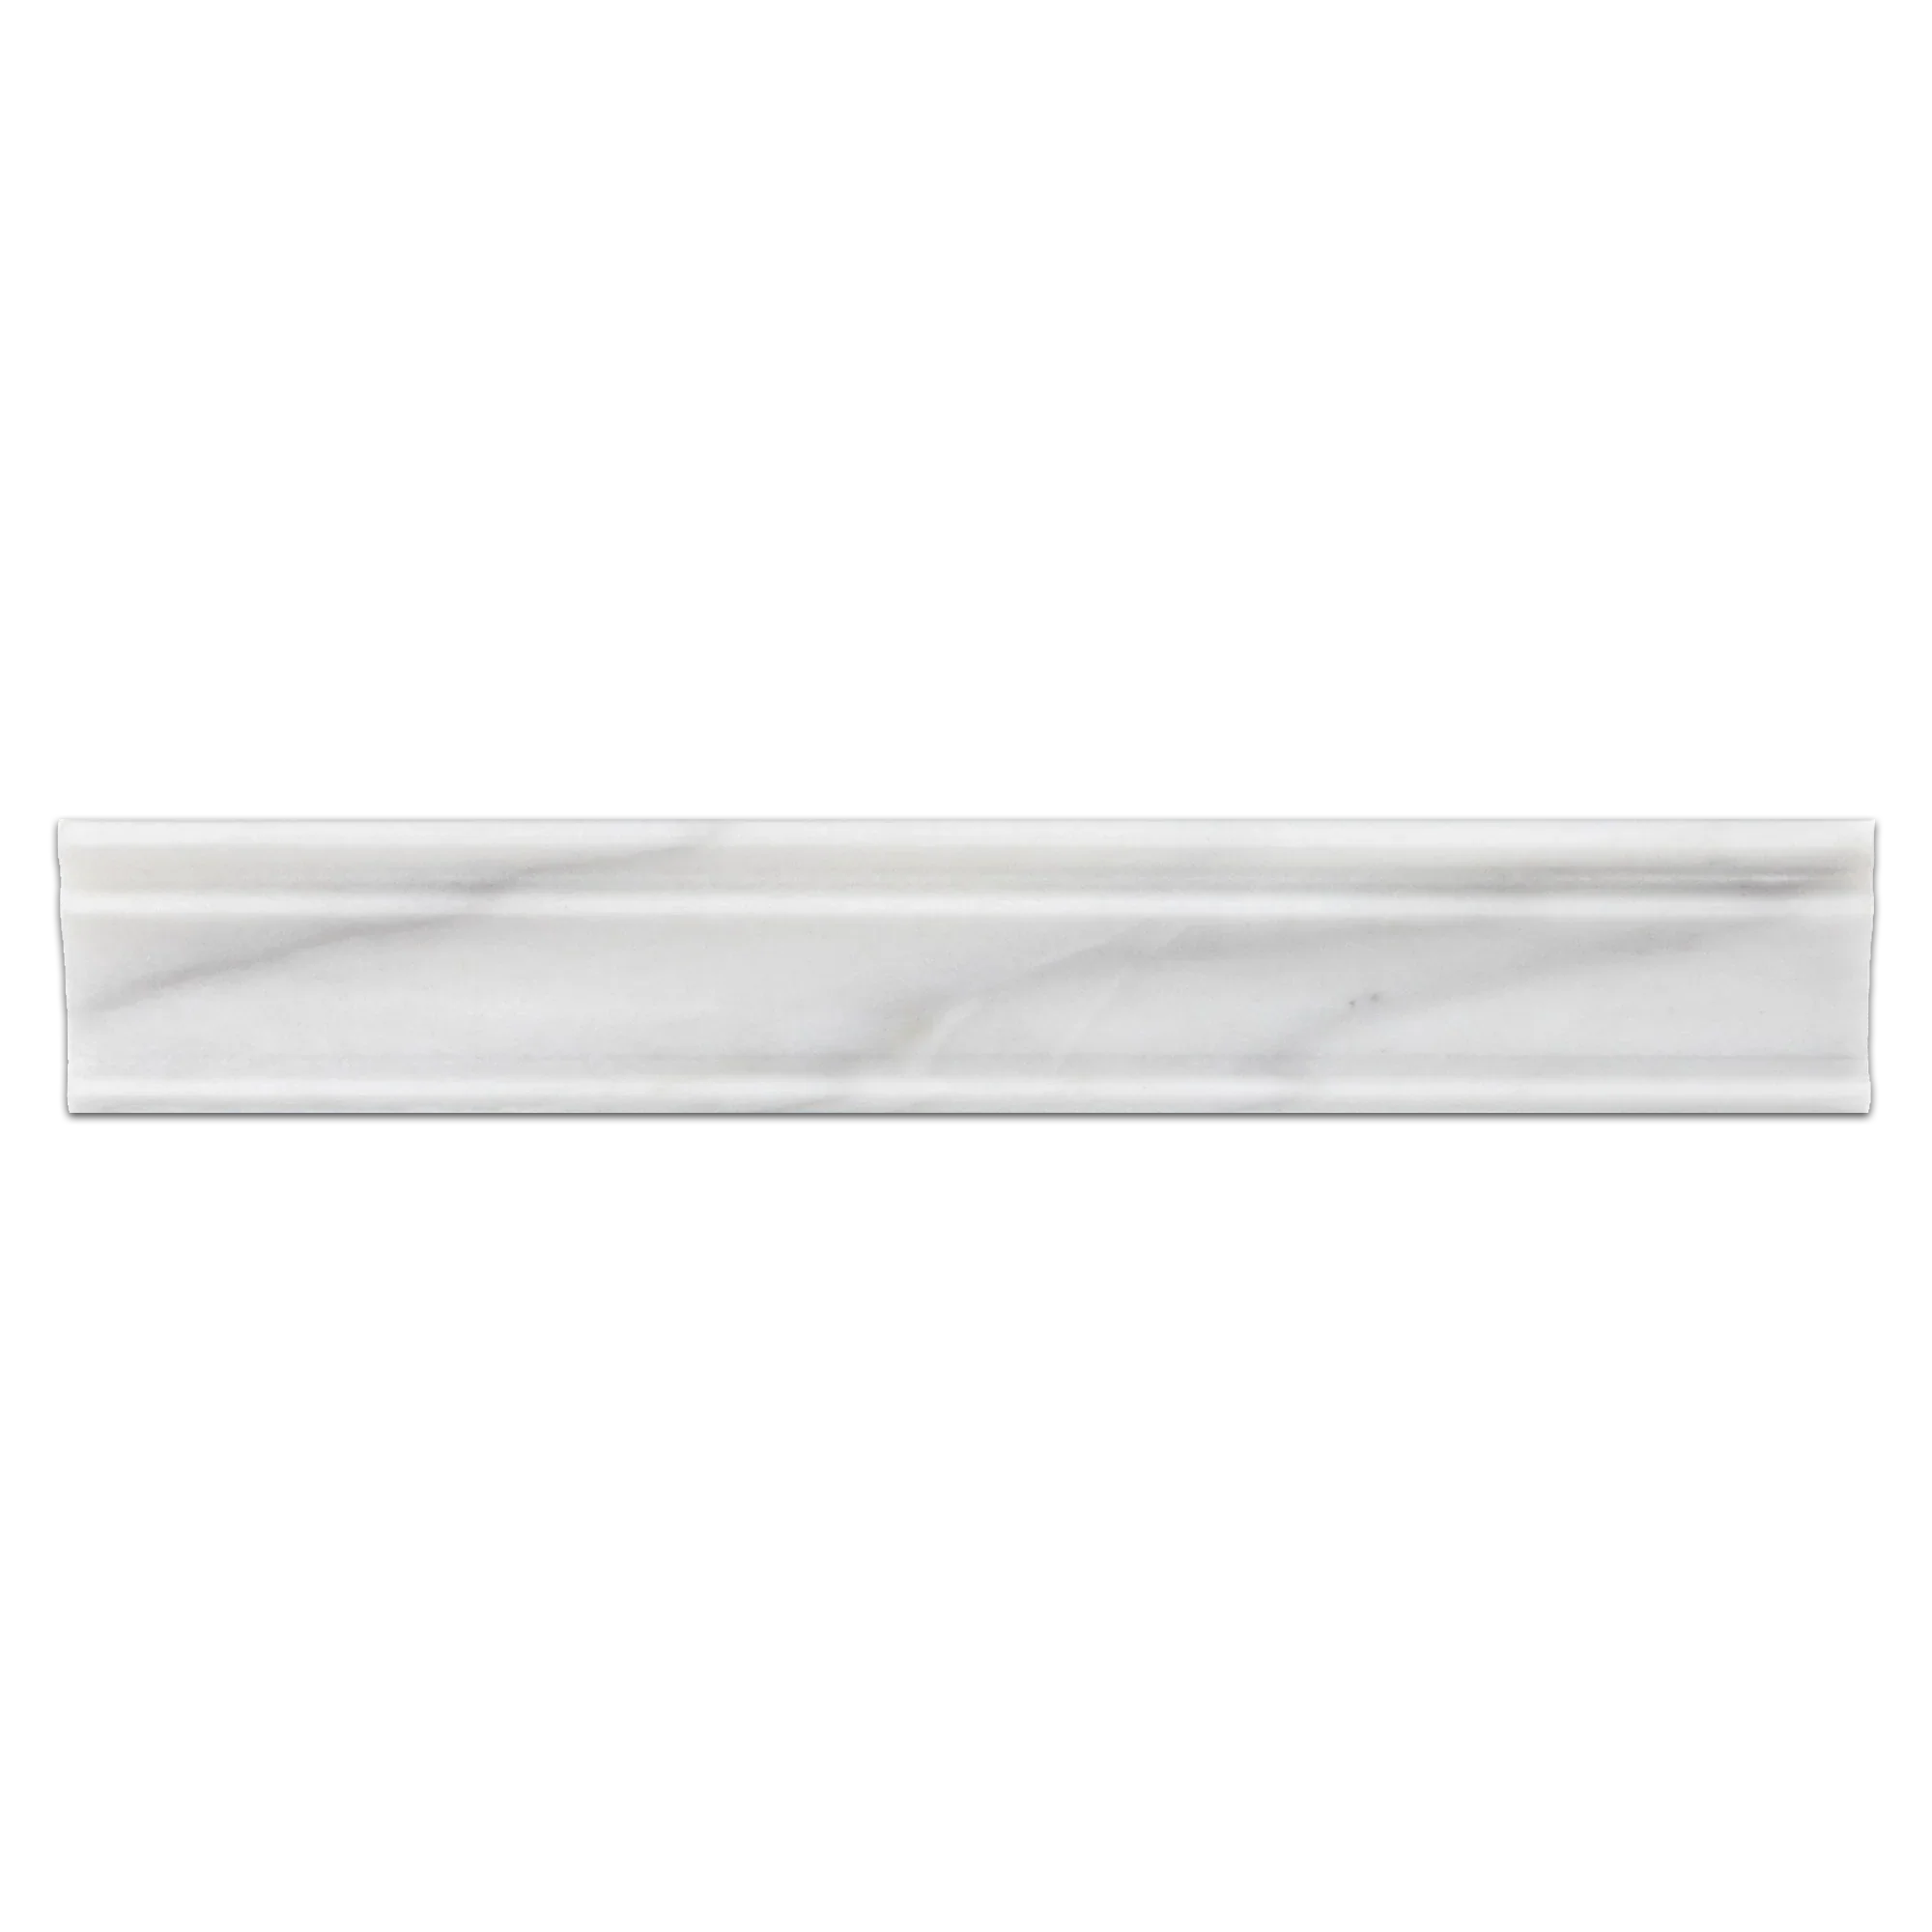 Elon Ice White Marble Crown 2x12 Honed Tile - Surface Group International